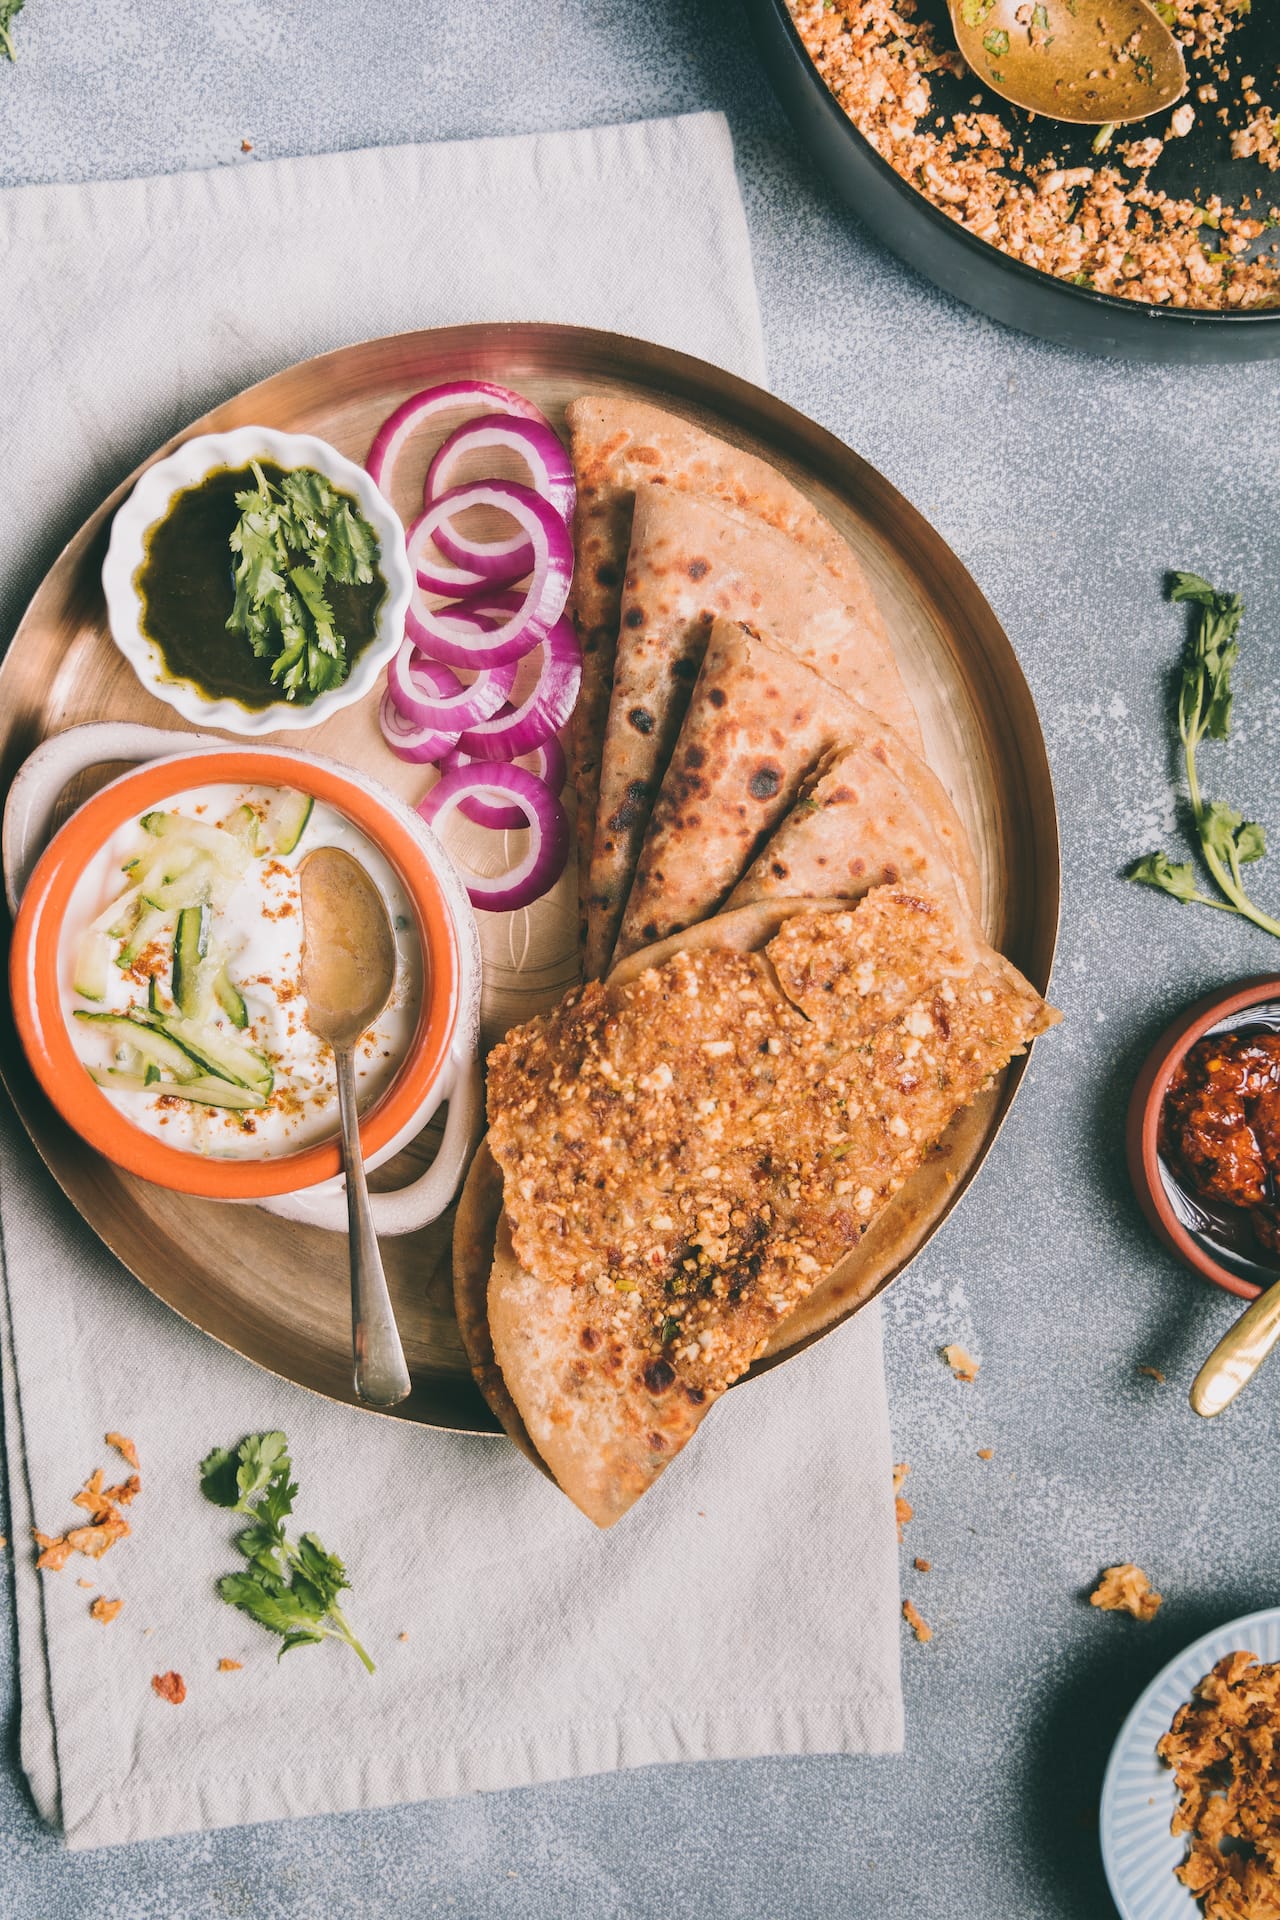 Spiced Paneer Paratha - EASY INDIAN FLATBREAD 